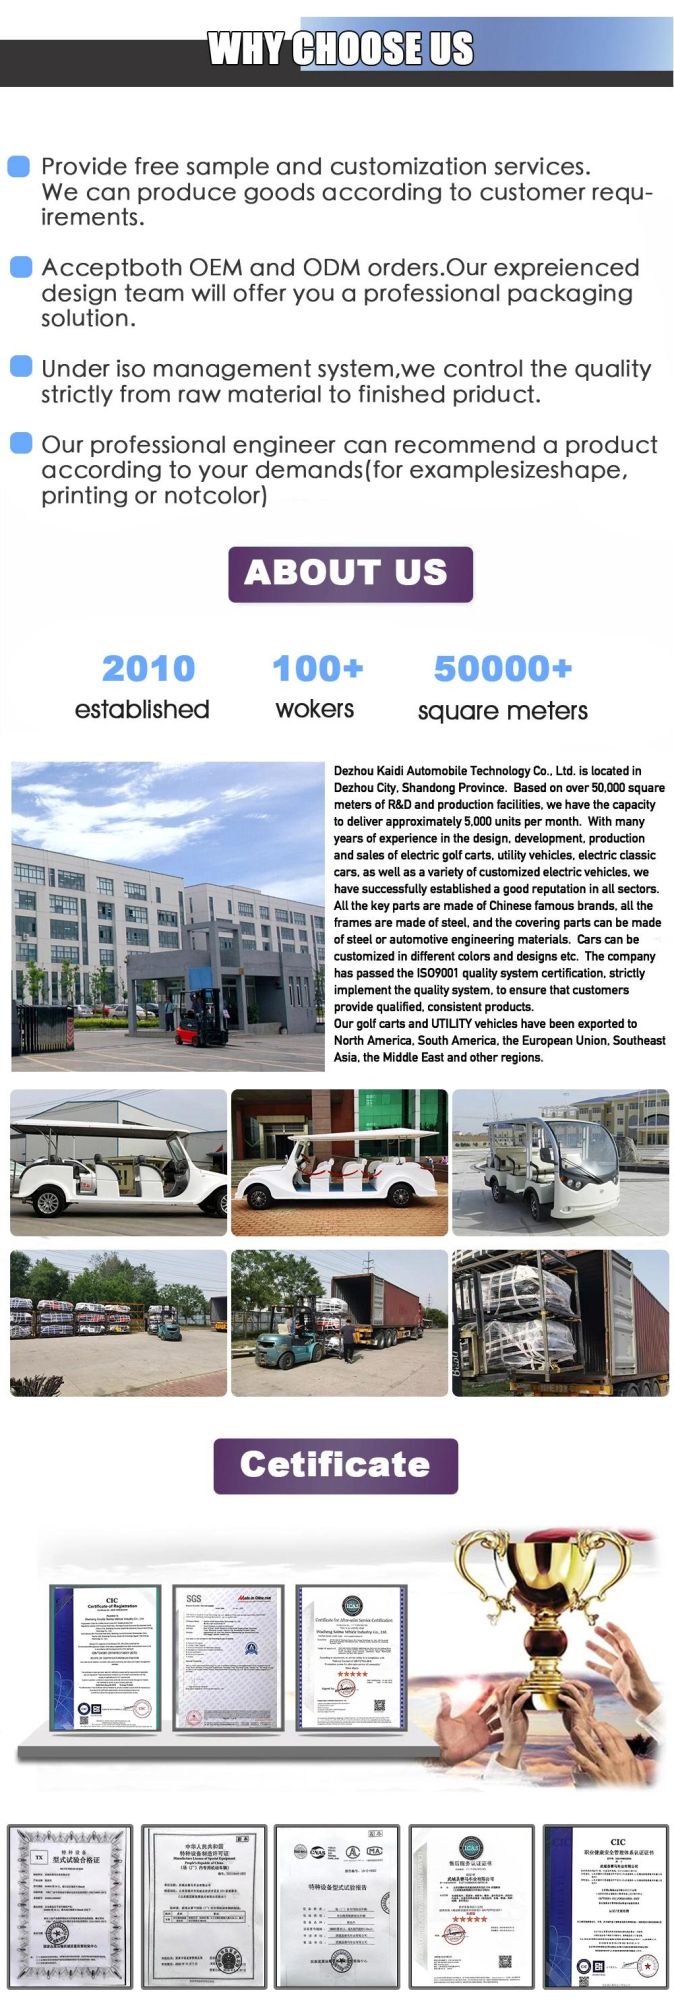 11seats Electric Shuttle Bus, Zoo Shuttle, Sightseeing Bus with Automatic Drive System